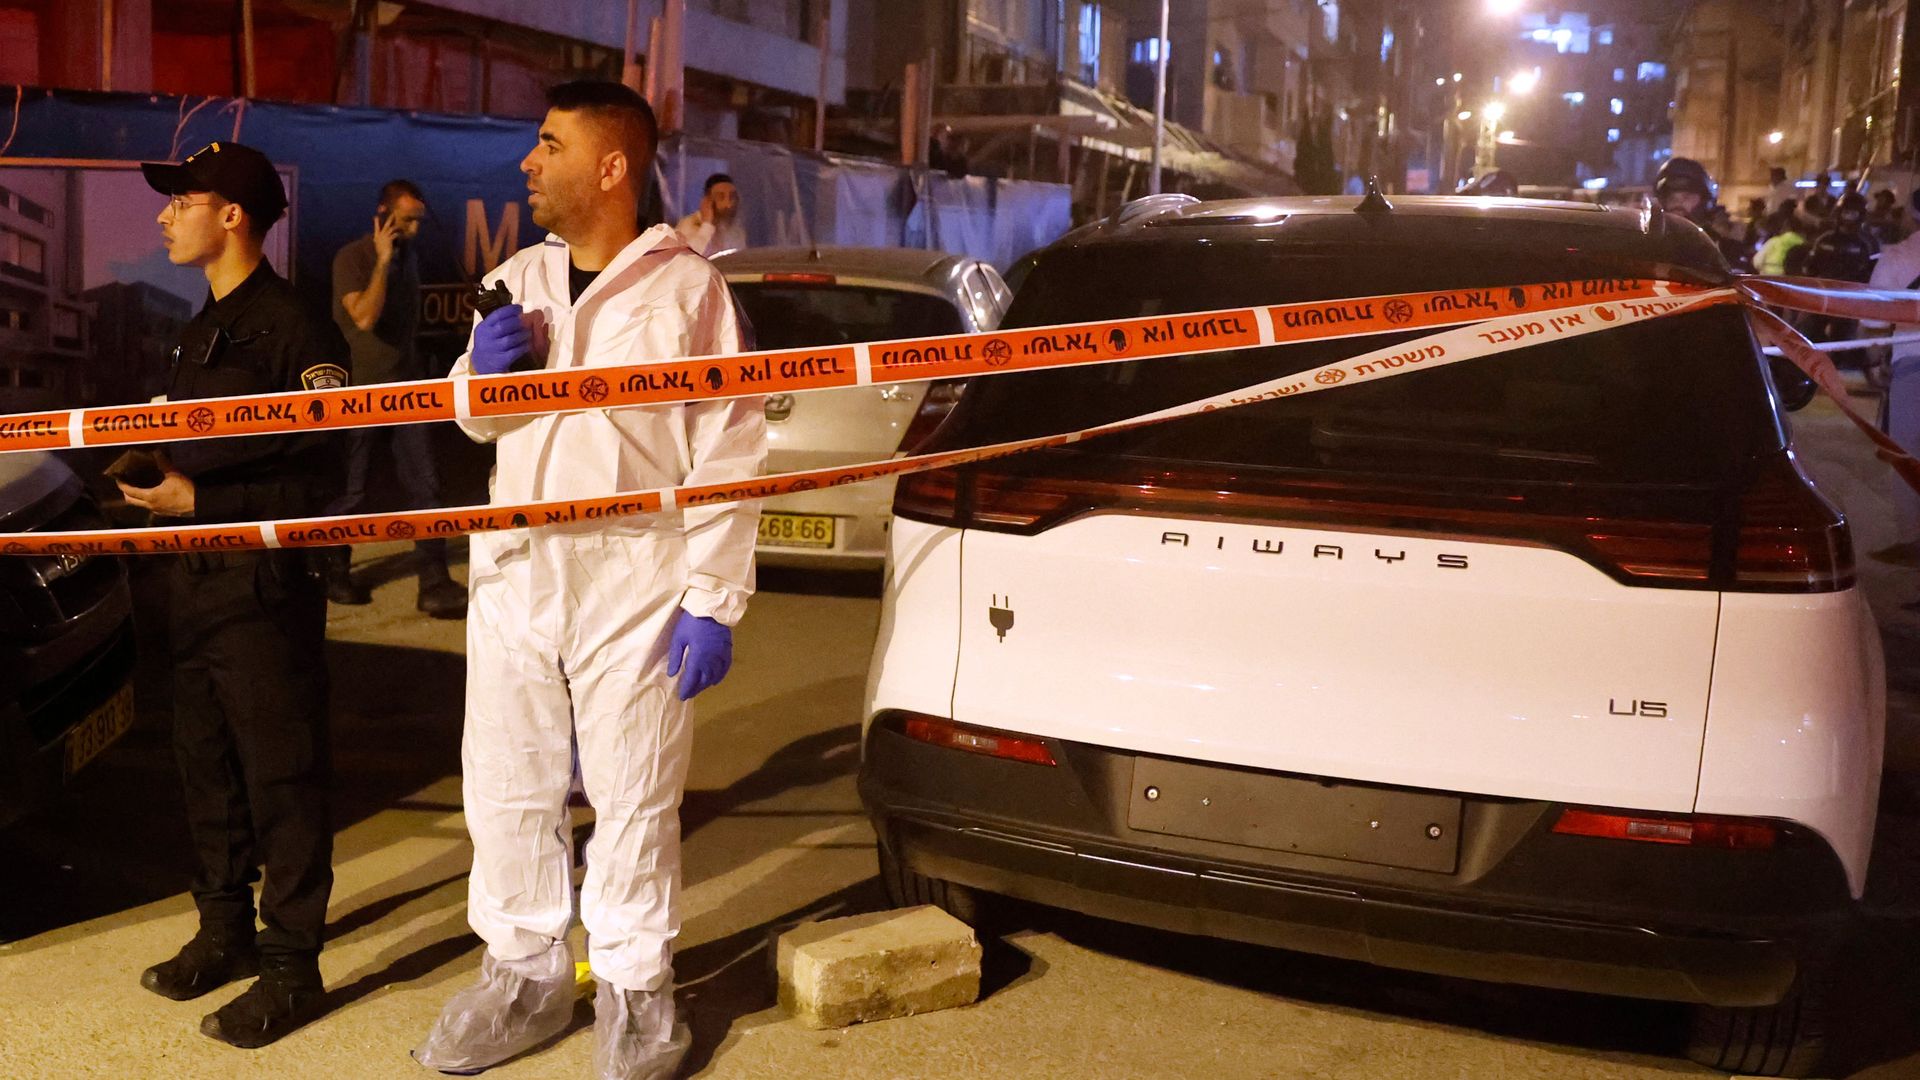 Israeli security forces gather at the scene of an attack on March 29, 2022 in Bnei Brak